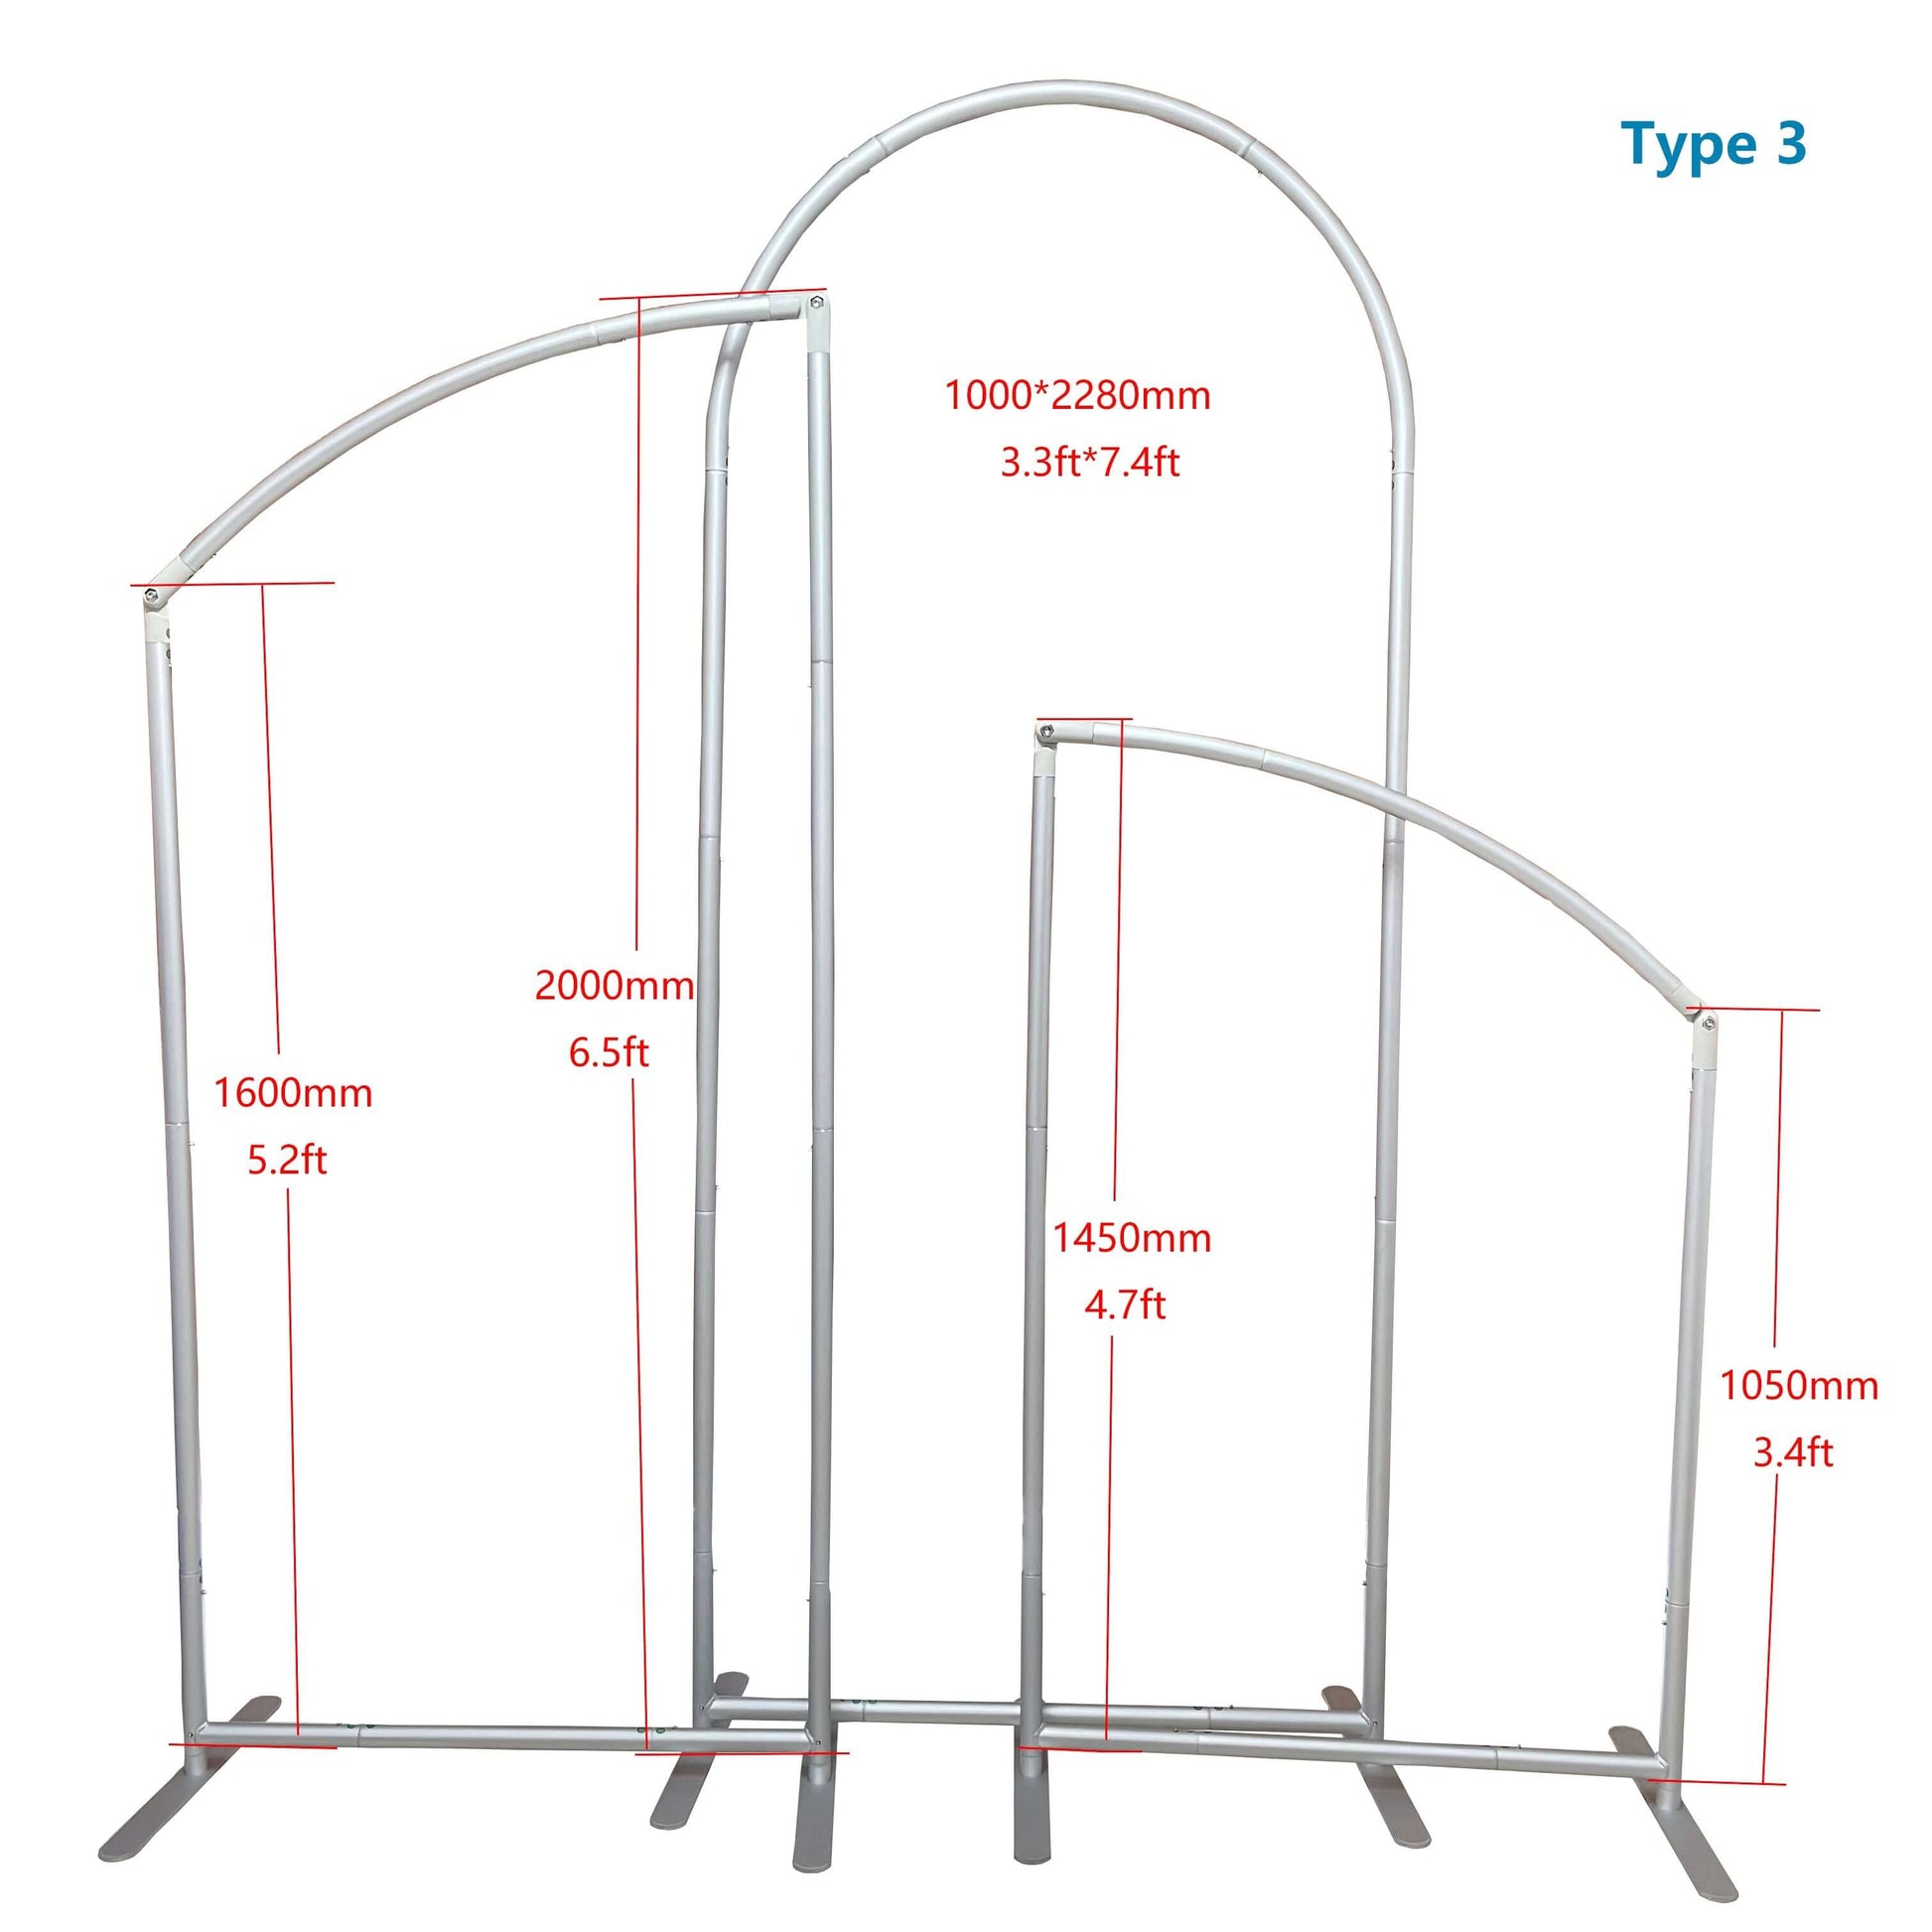 Chiara Arch Stand Frames 5X7Ft Open 3X4Ft 4X7Ft 3.3X4.7Ft+3.3X7.4Ft+3.3X6.5Ft Stands Party Backdrop